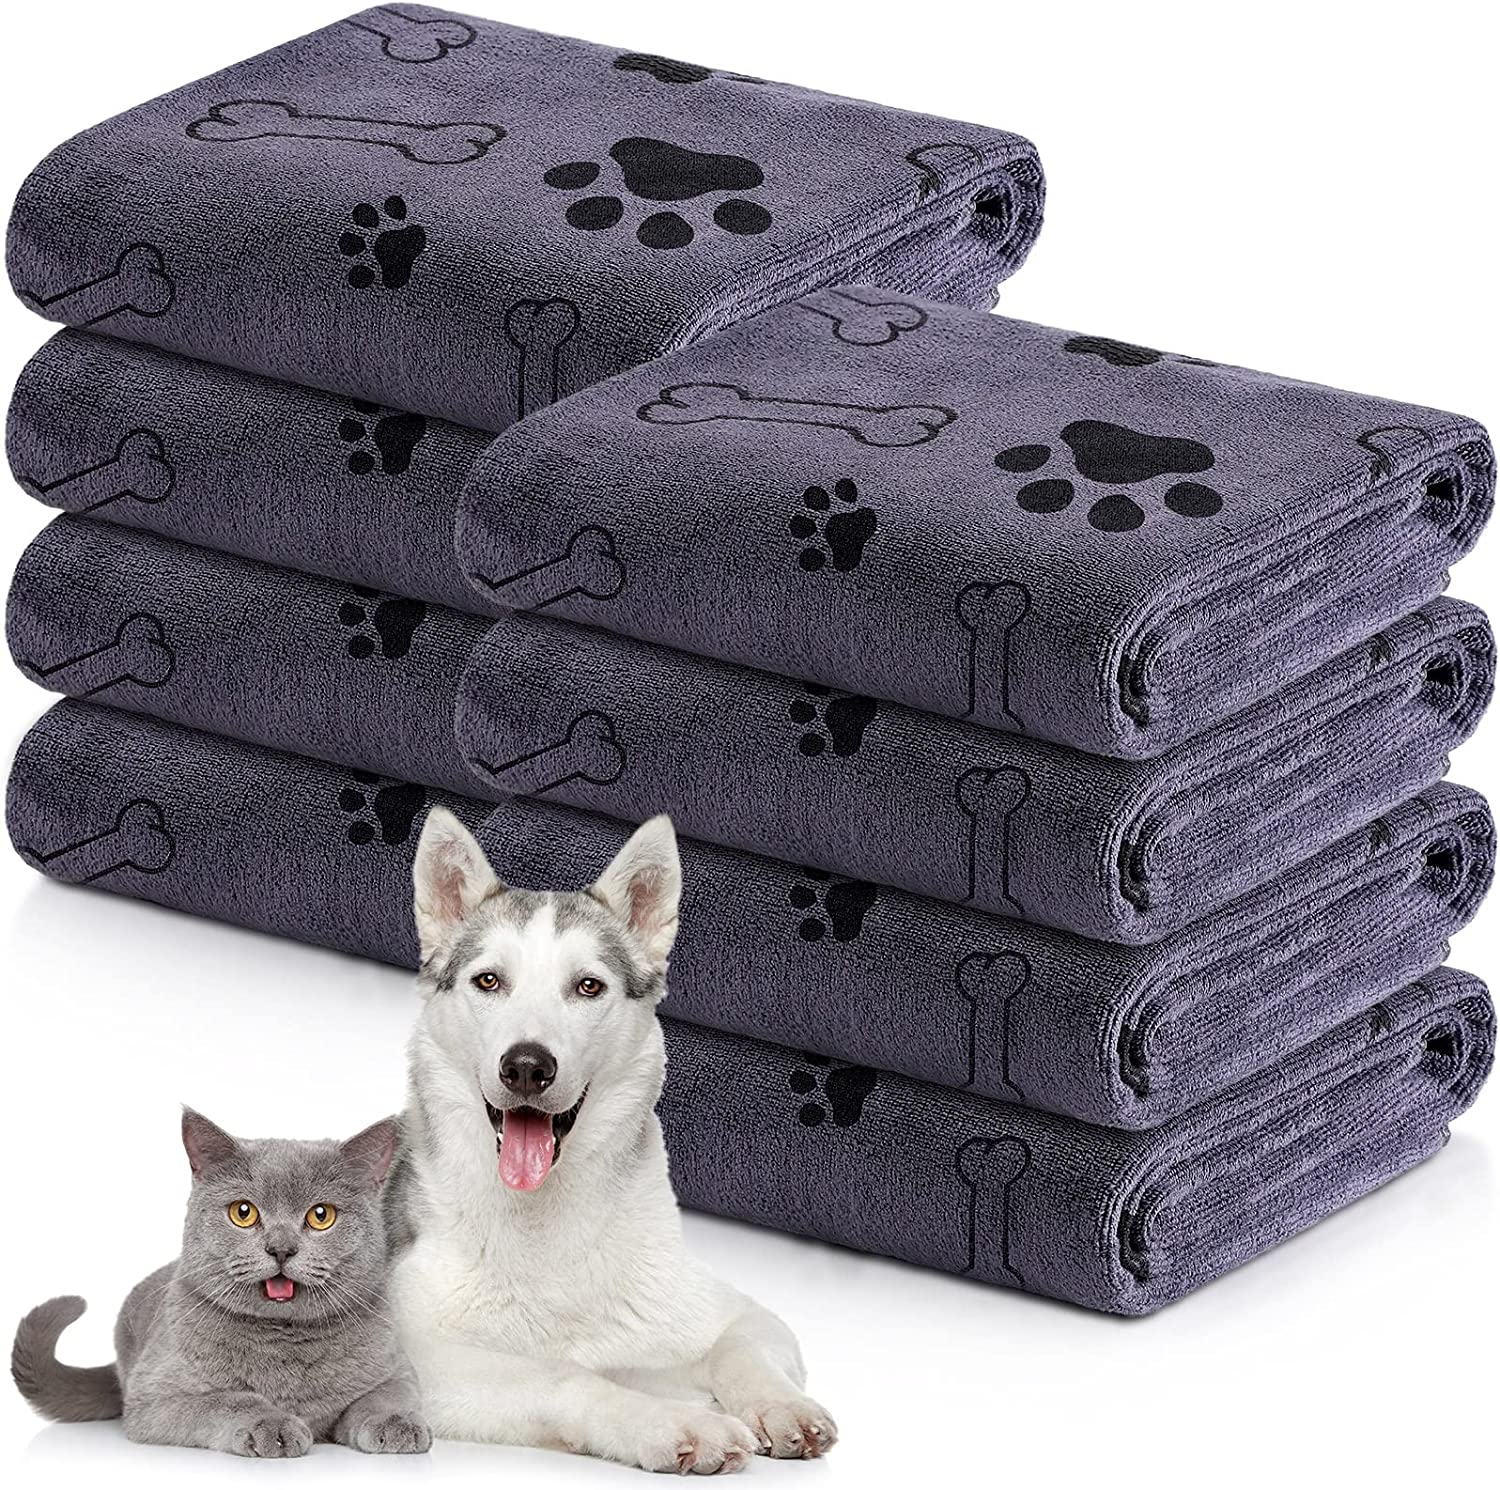 2pcs Pet Absorbent Towel Dog Cat Golden Shower Towel Quick Drying Large  Towel Bathroom Accessories Supplies 11 81x15 75in, Save More With Clearance  Deals